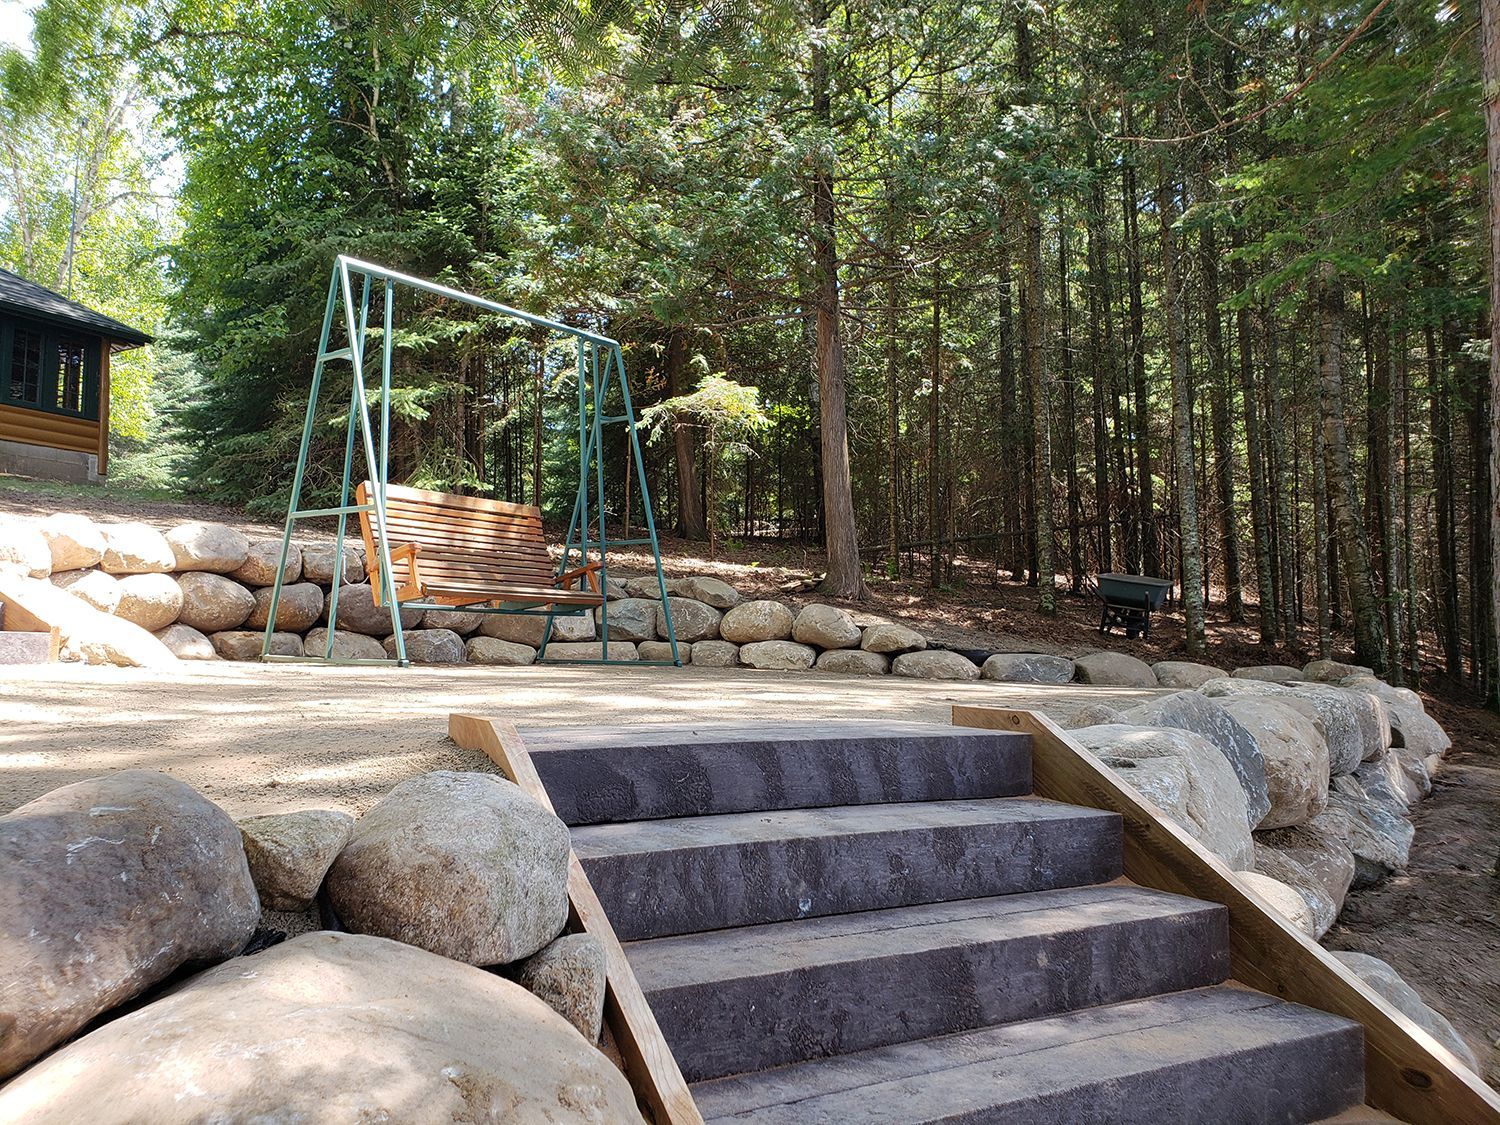 A set of stairs leading up to a rock wall in the woods.